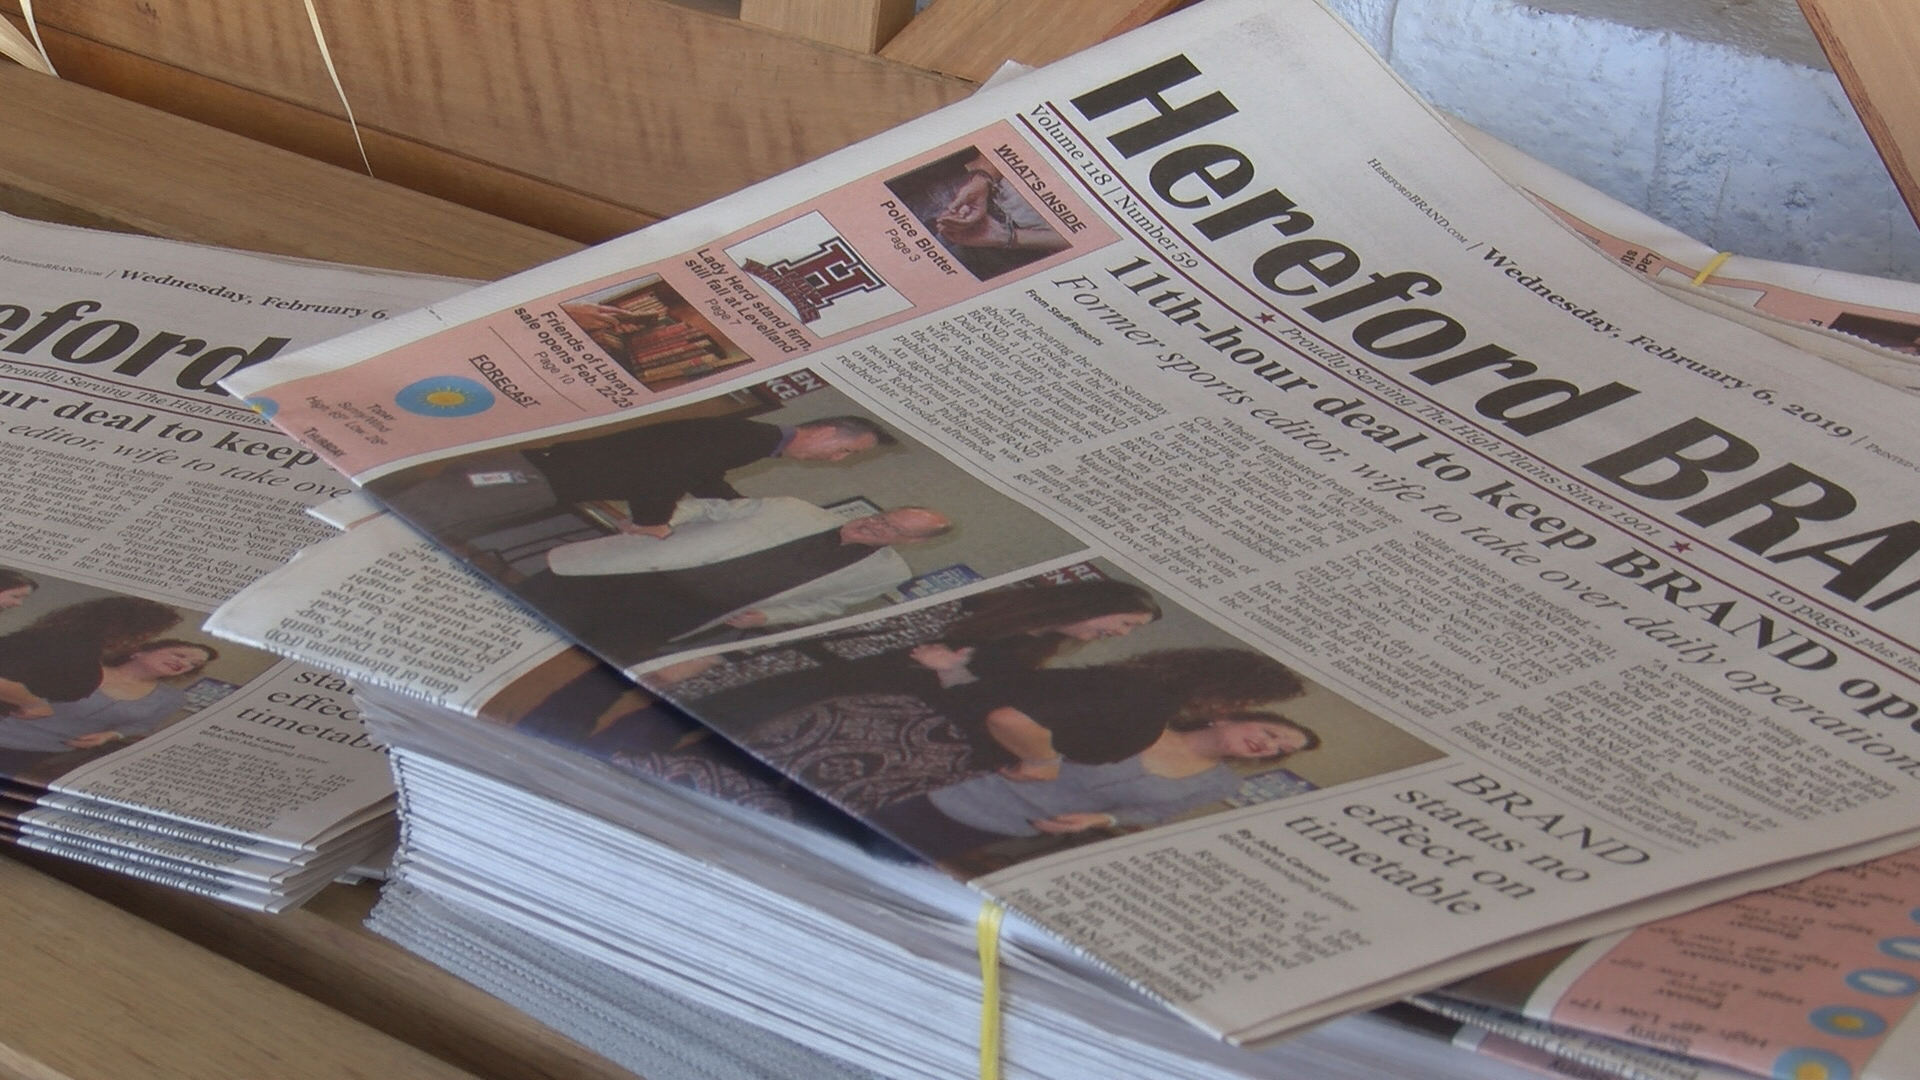 Hereford Newspaper Gets Second Chance After Former Employee Purchases The Publication